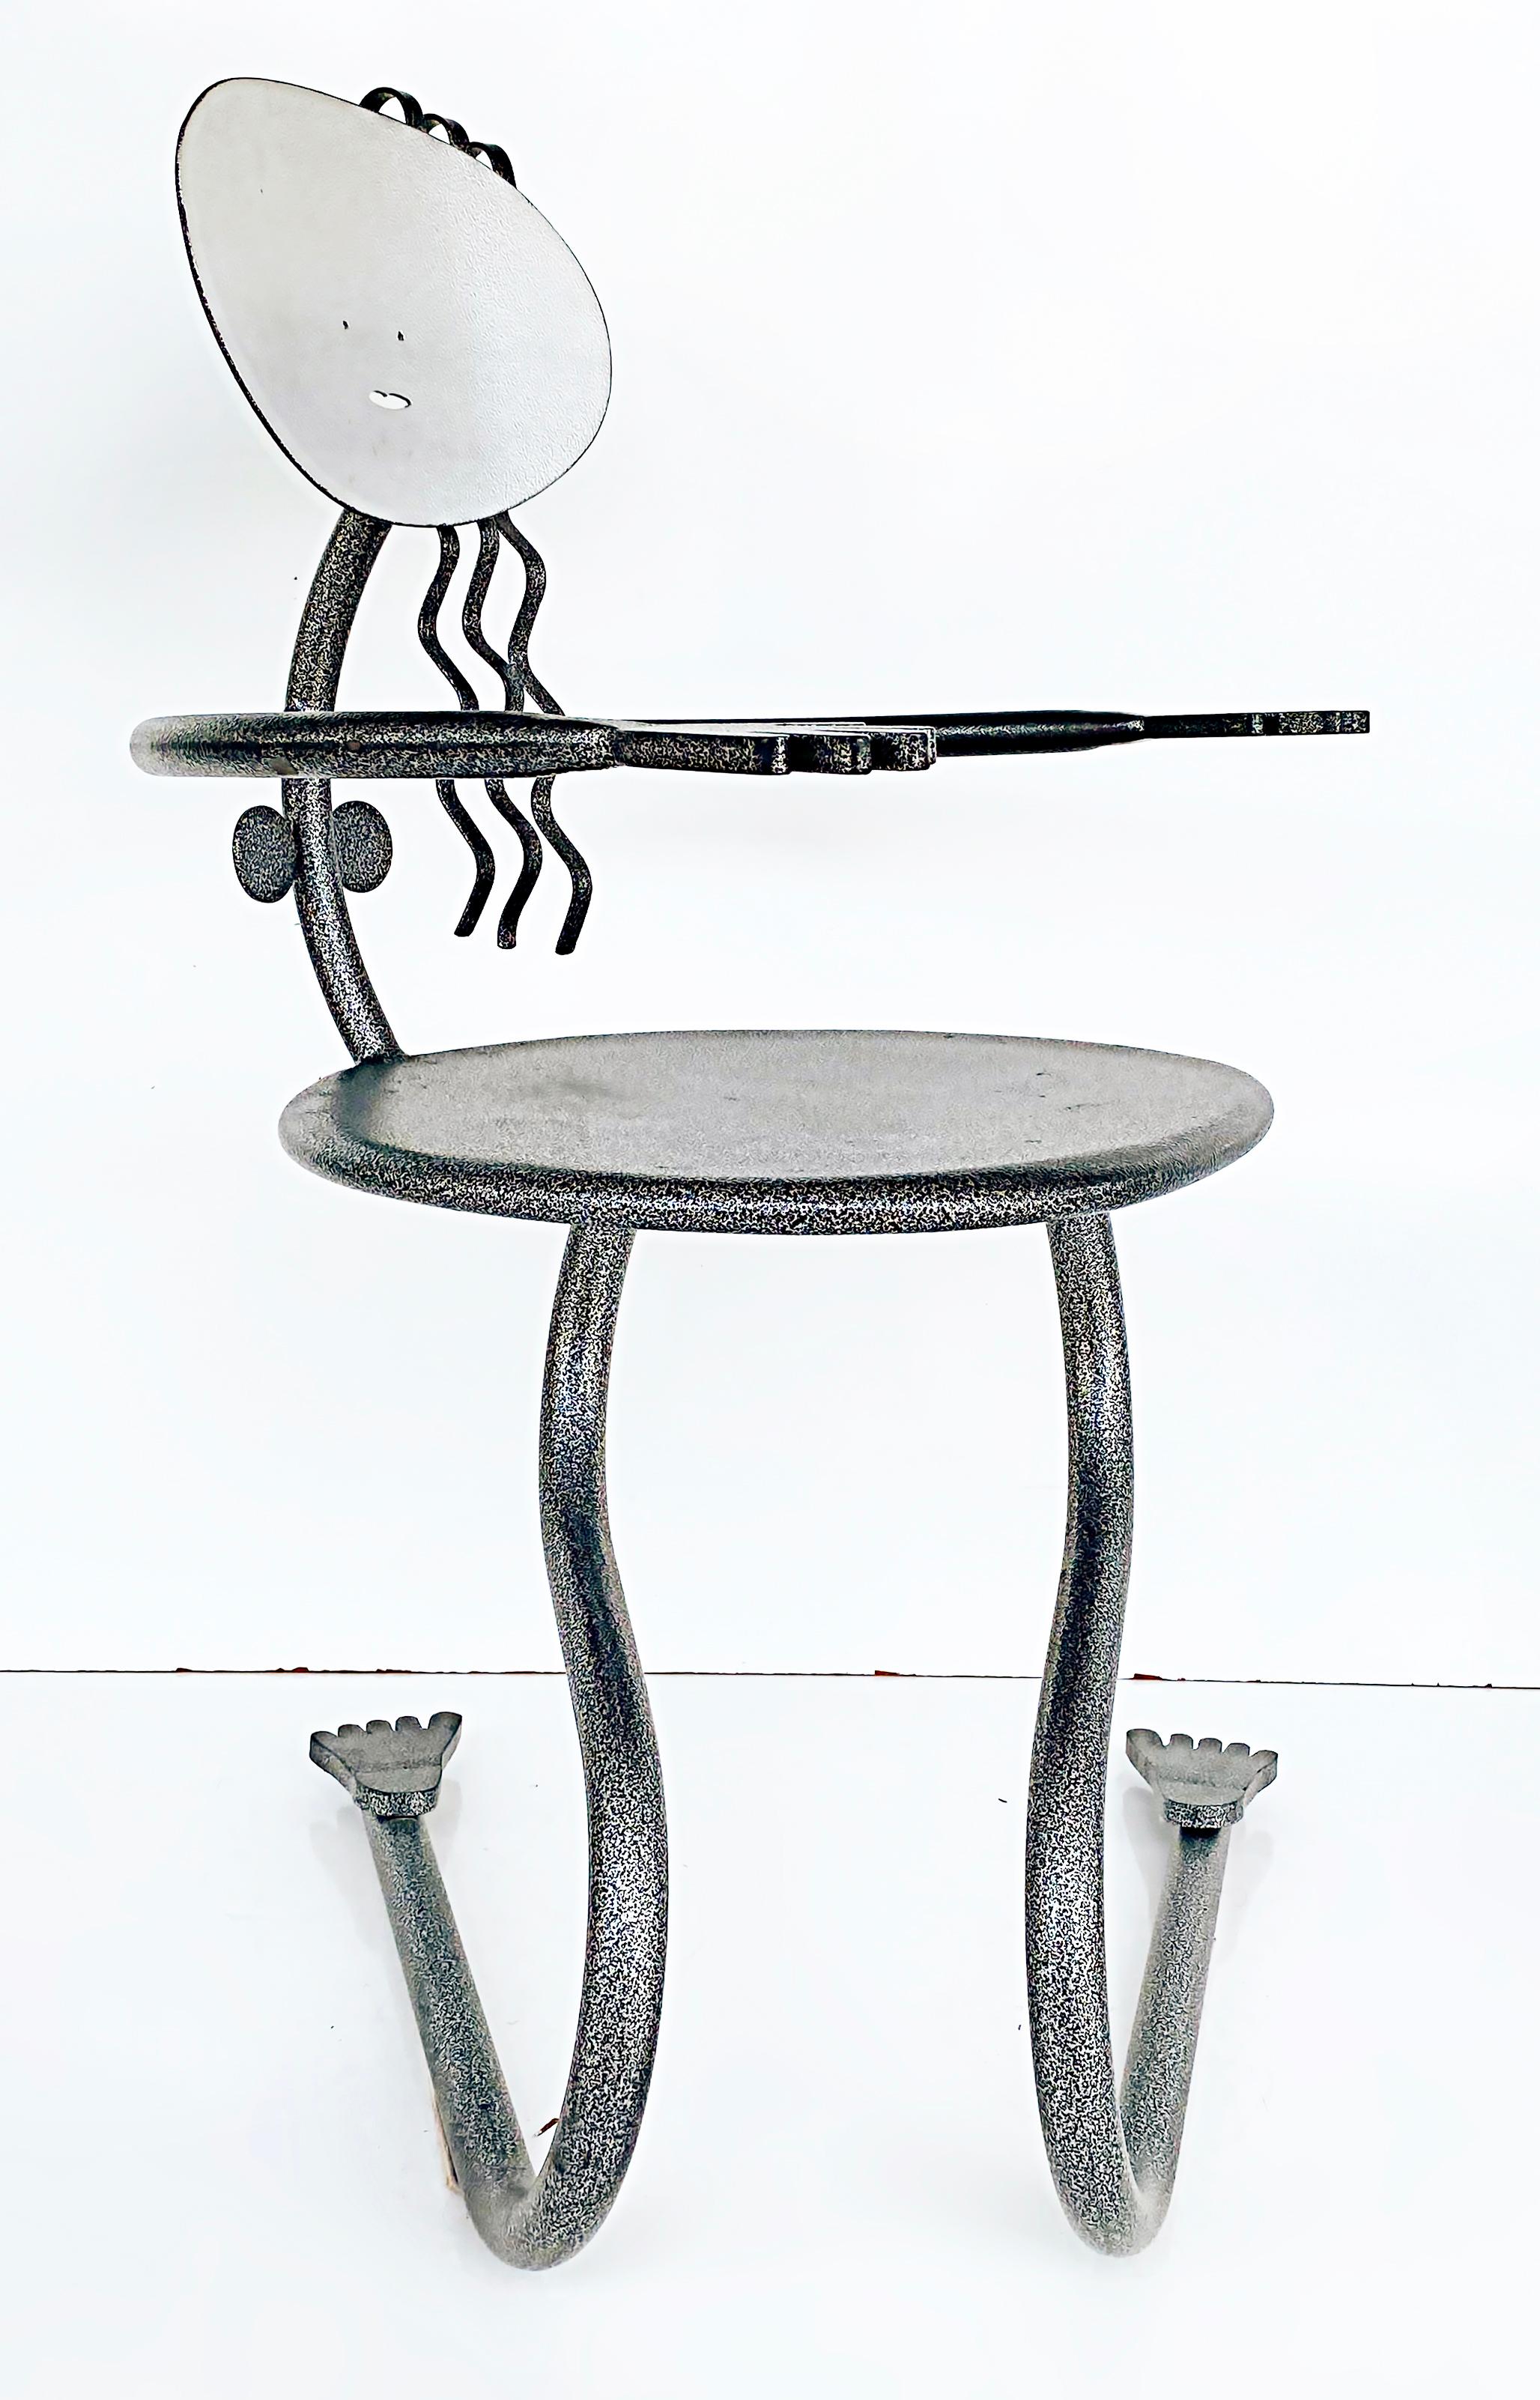 Whimsical enameled iron sculptural post-modern chair of girl

Offered for sale is a 1980s sculptural Postmodern chair created in the form of a woman or a girl. The chair is whimsical with long hair and outstretched arms with hands. The body is